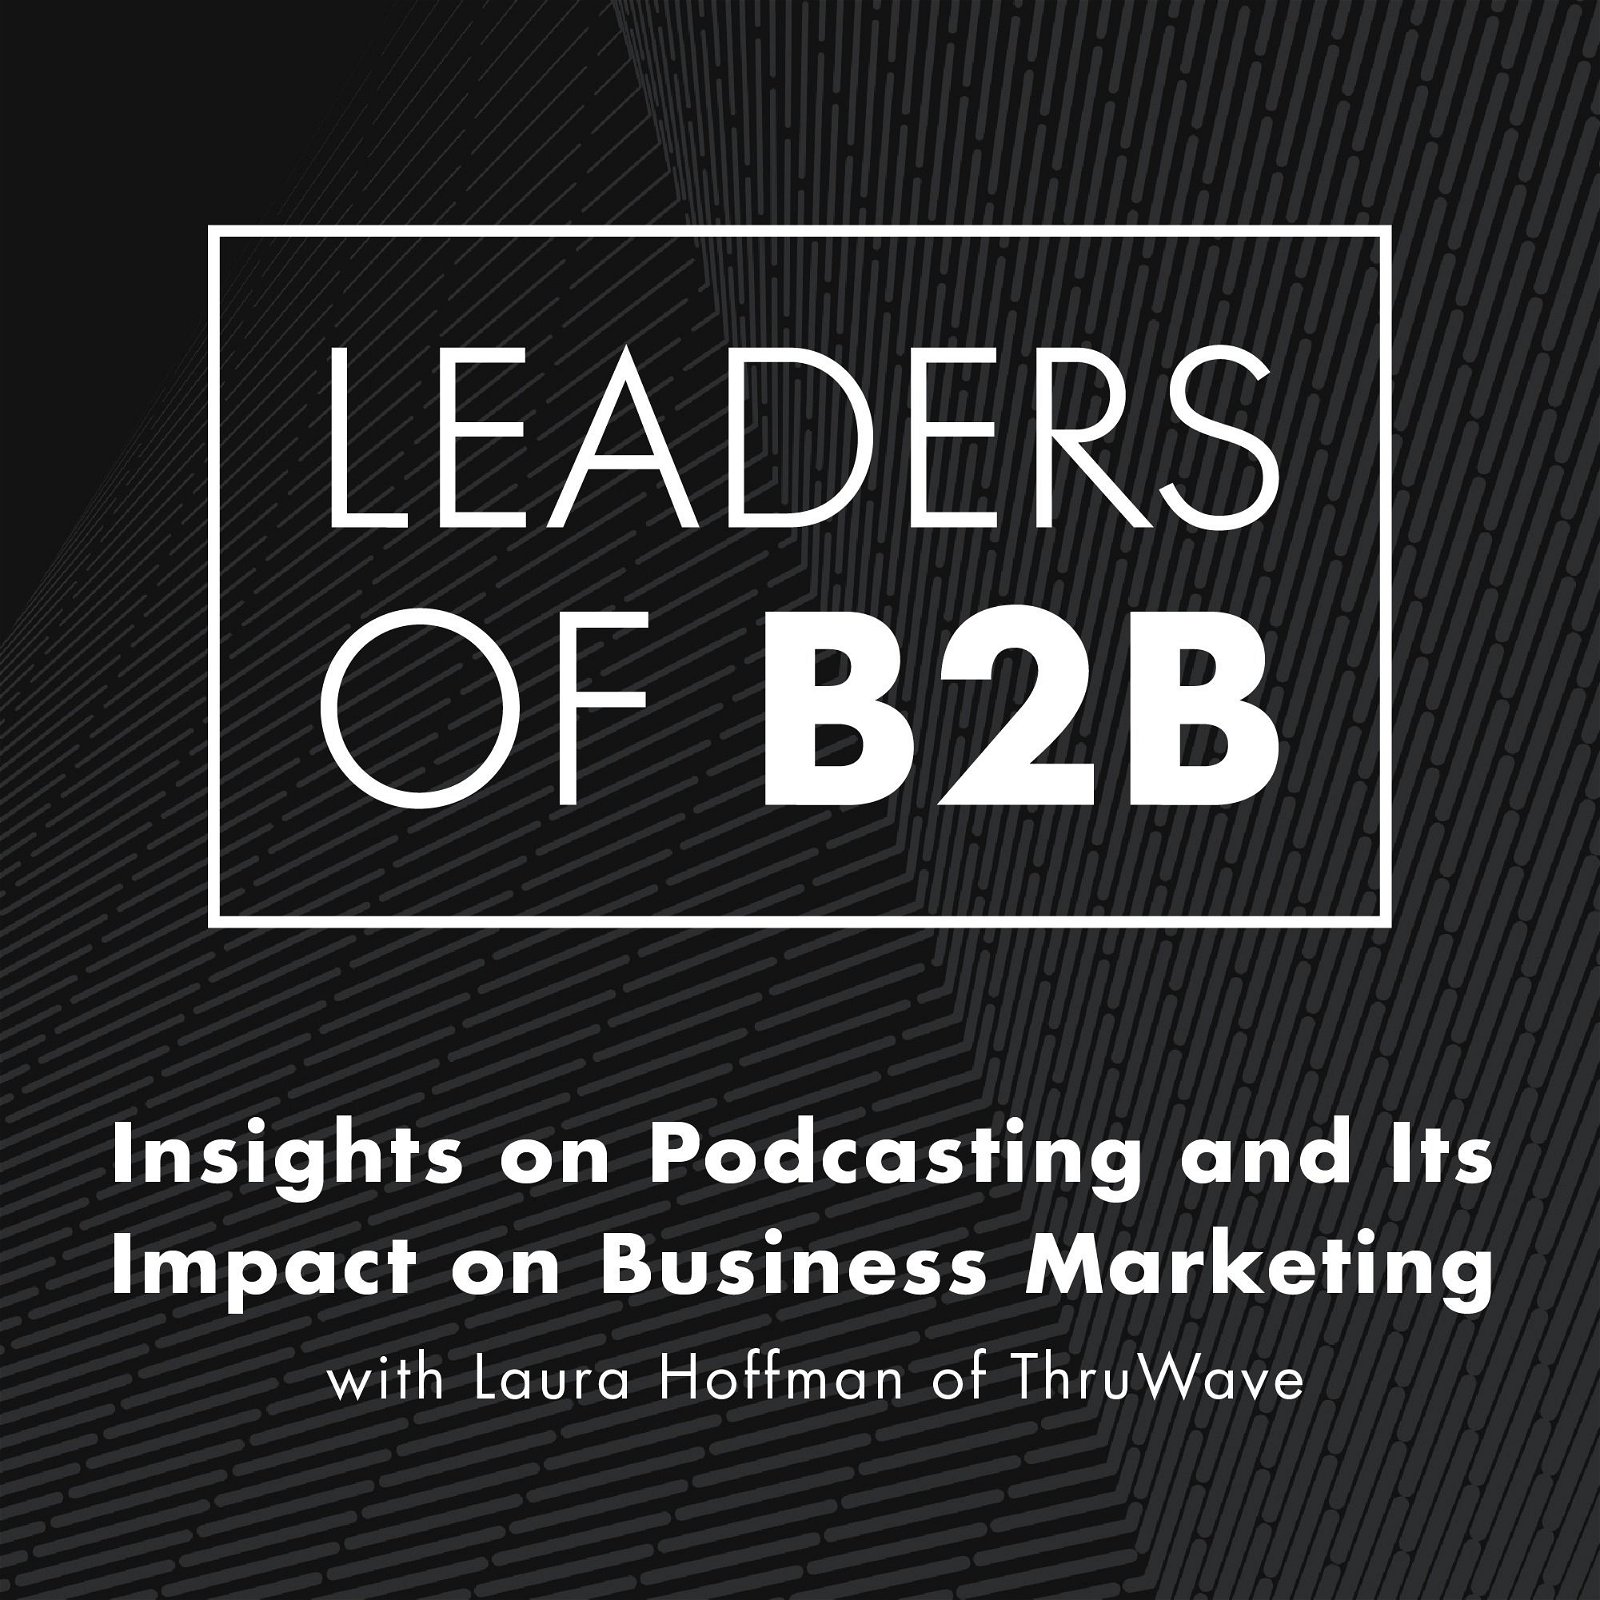 Insights on Podcasting and Its Impact on Business Marketing with Laura Hoffman of ThruWave, Inc.